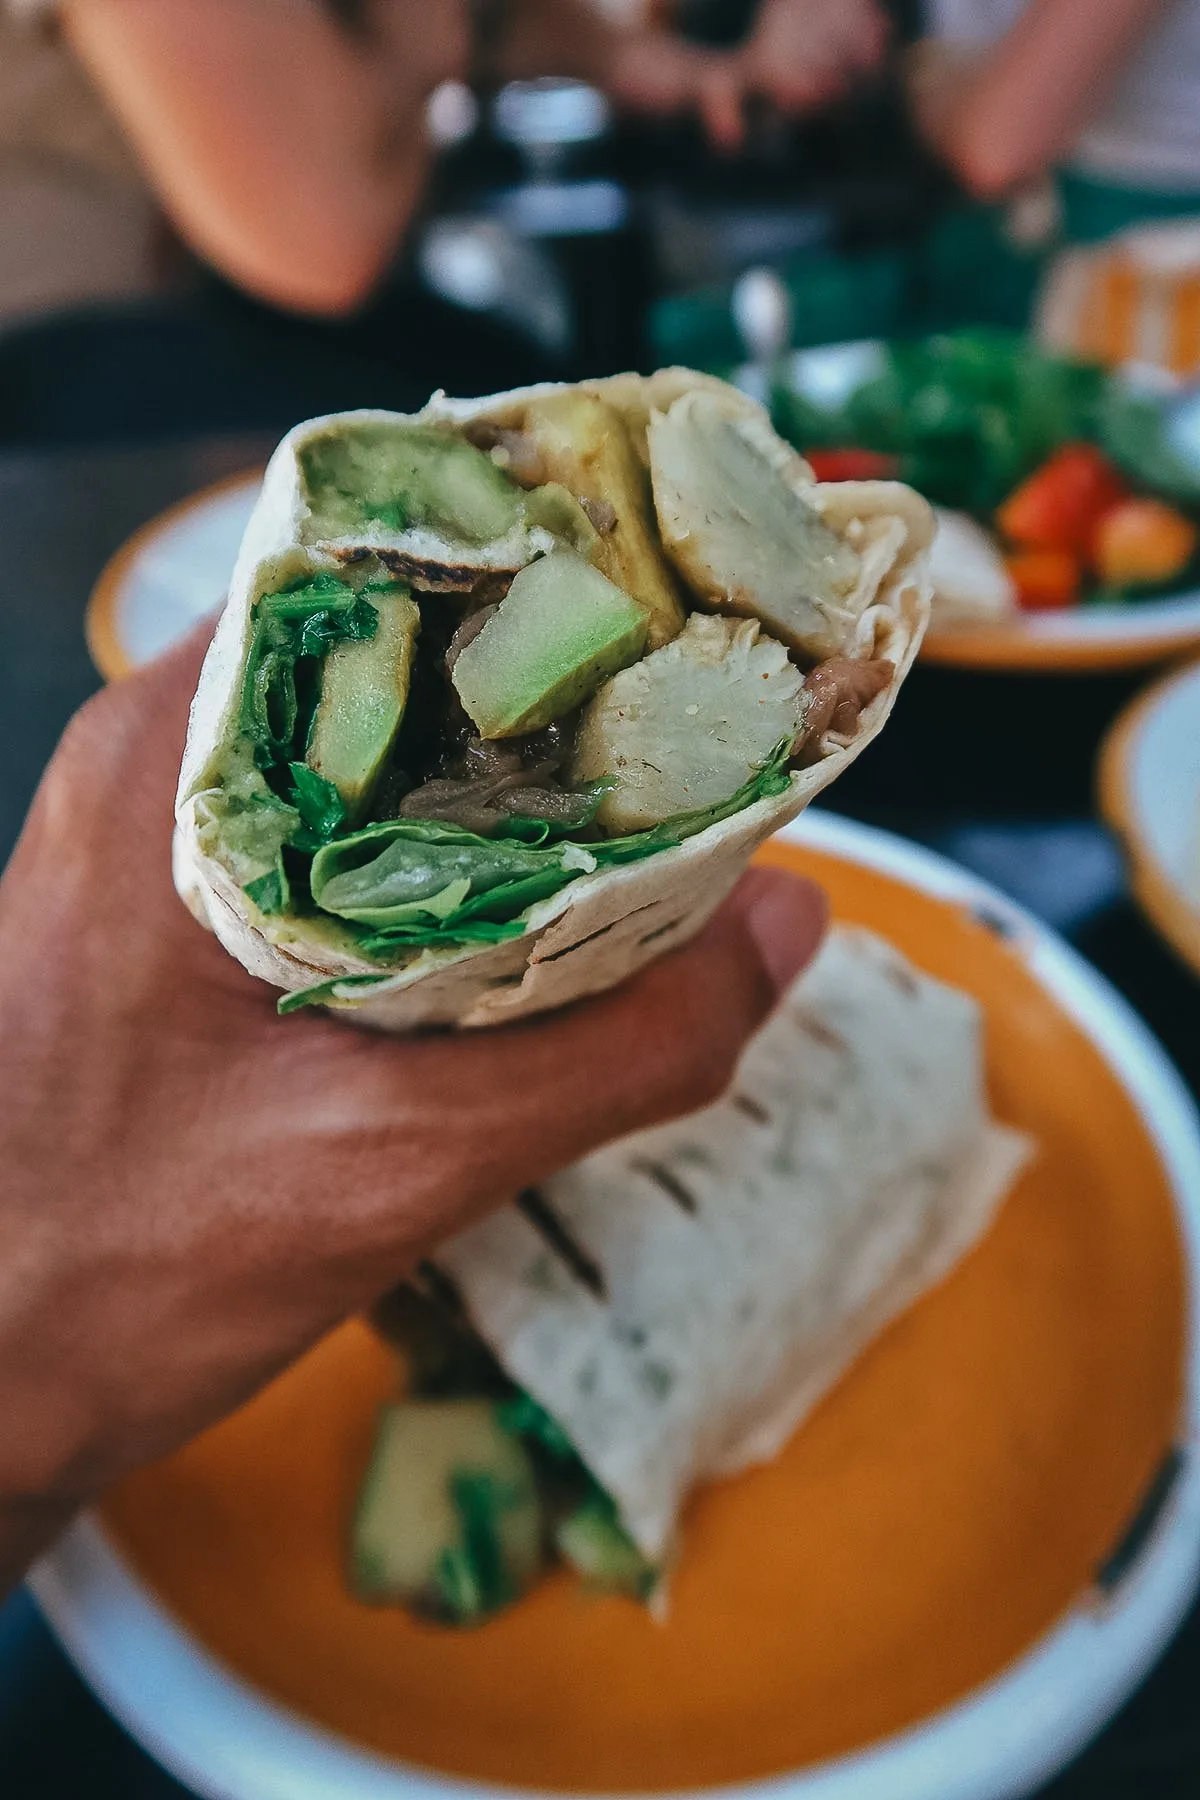 Vegetable wrap at a restaurant in Istanbul